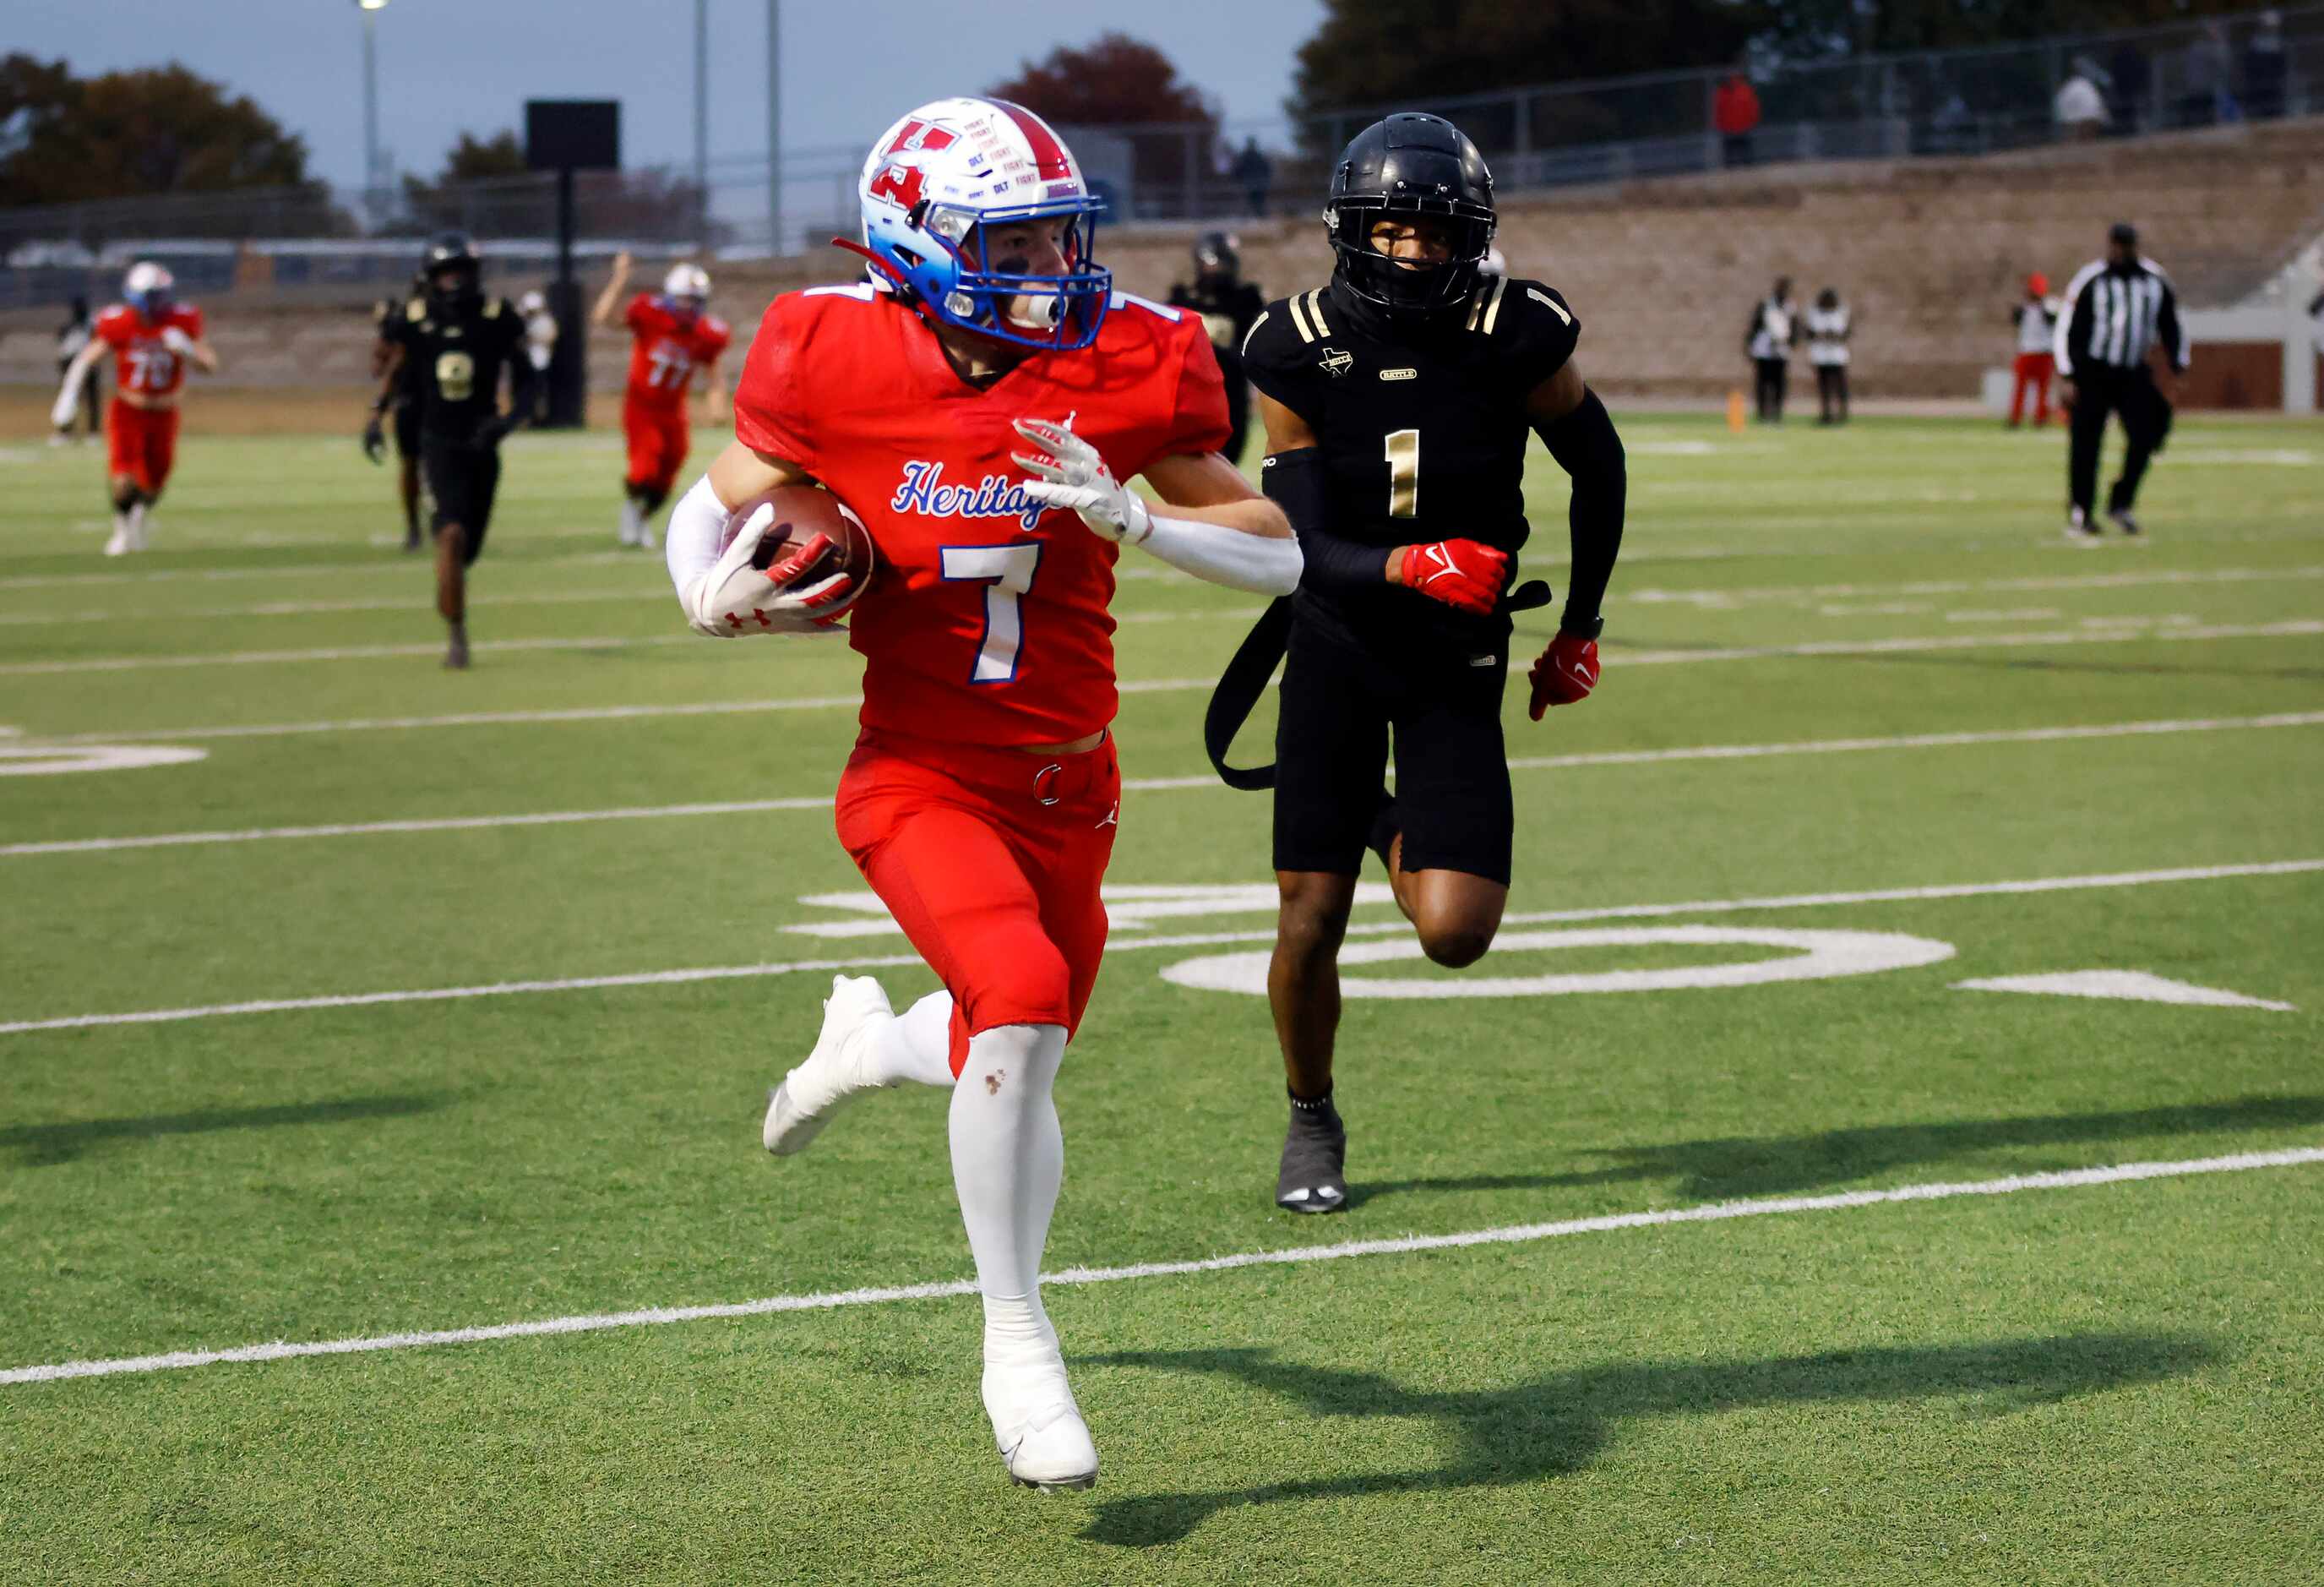 Midlothian Heritage wide receiver Stetson Sarratt 
(7) races down the field for a long catch...